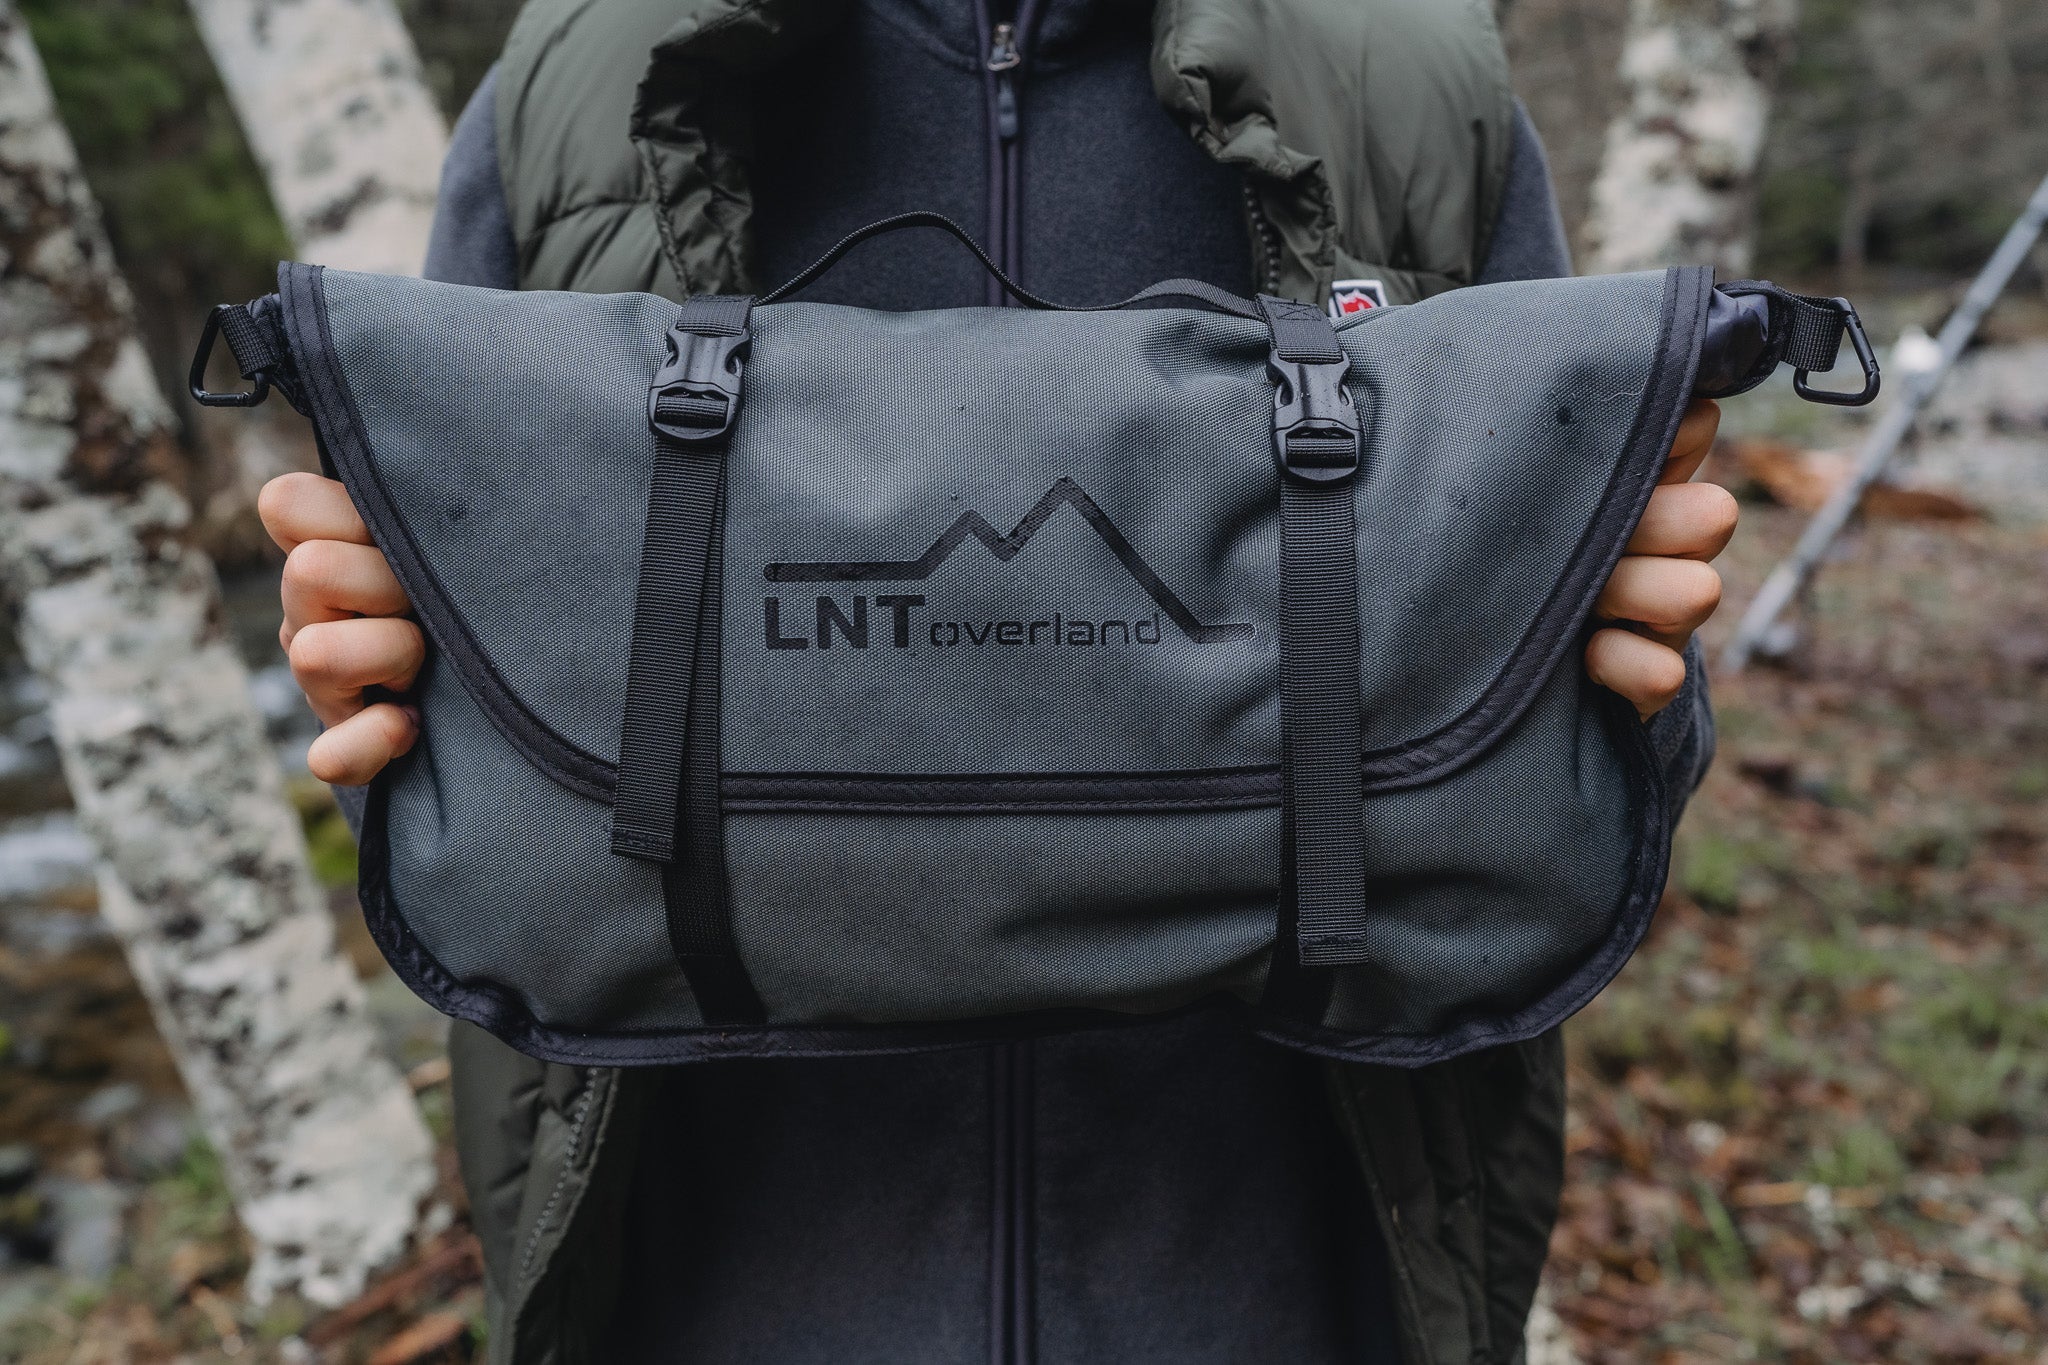 lnt overland's shower tent carry bag is compact size and easy to carry.